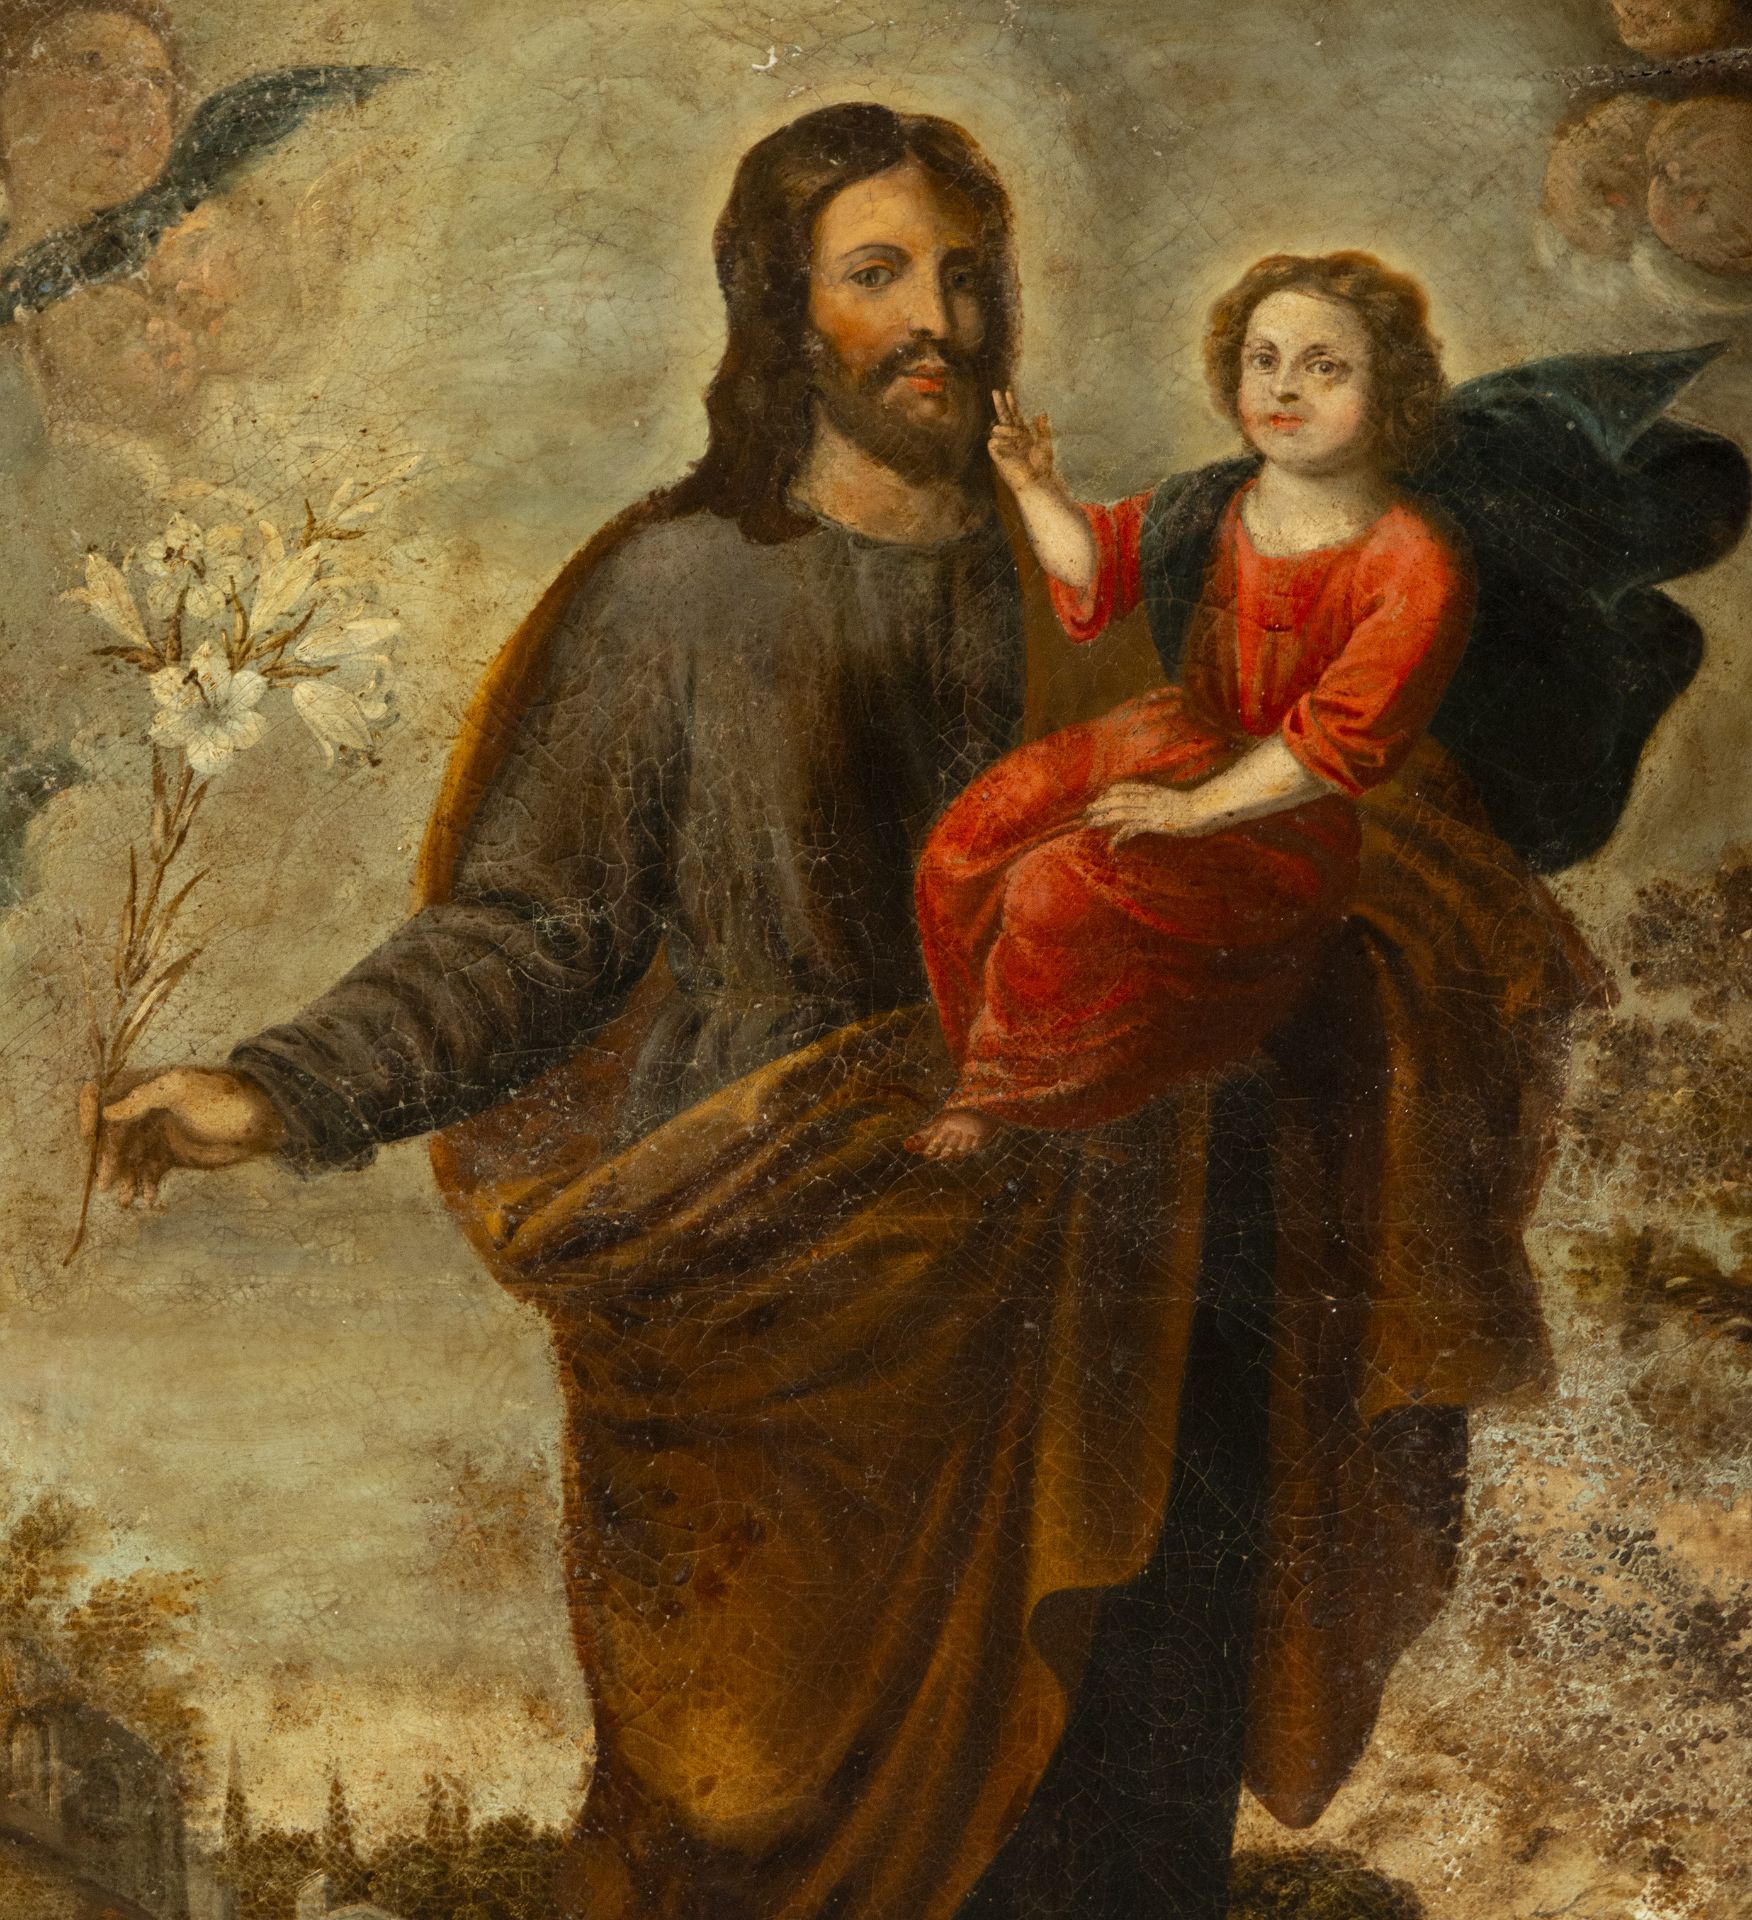 Saint Joseph with Child Jesus. Spanish or colonial school from the 17th century - Image 2 of 5